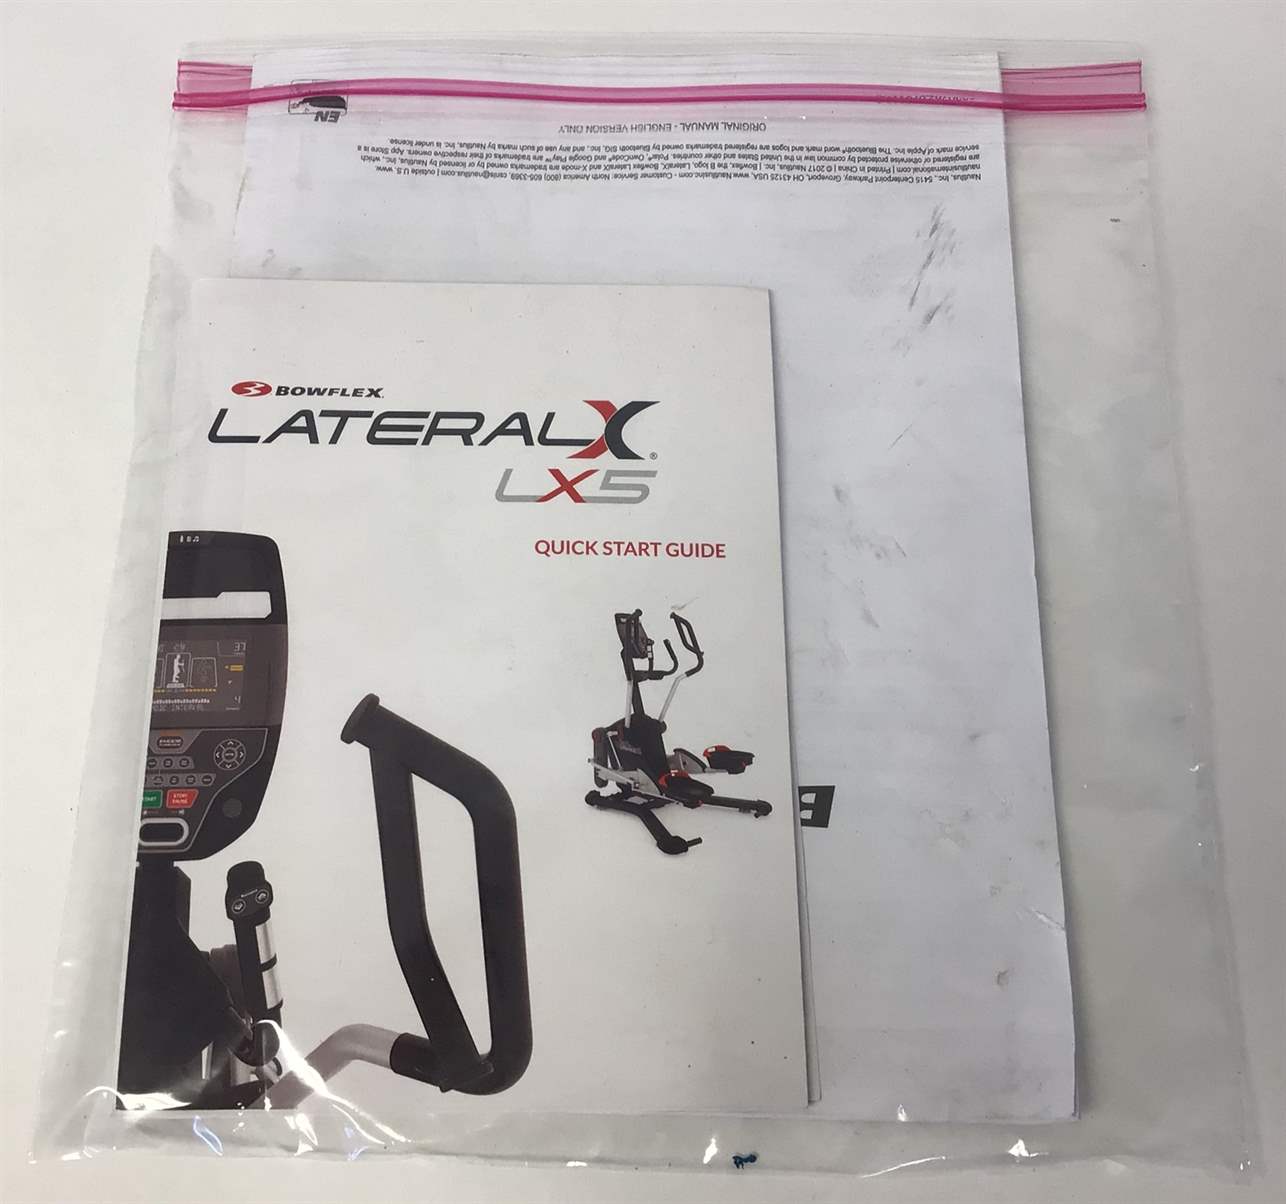 Bowflex Lateralx LX5 Quick Start Guide and User Manual (Used)